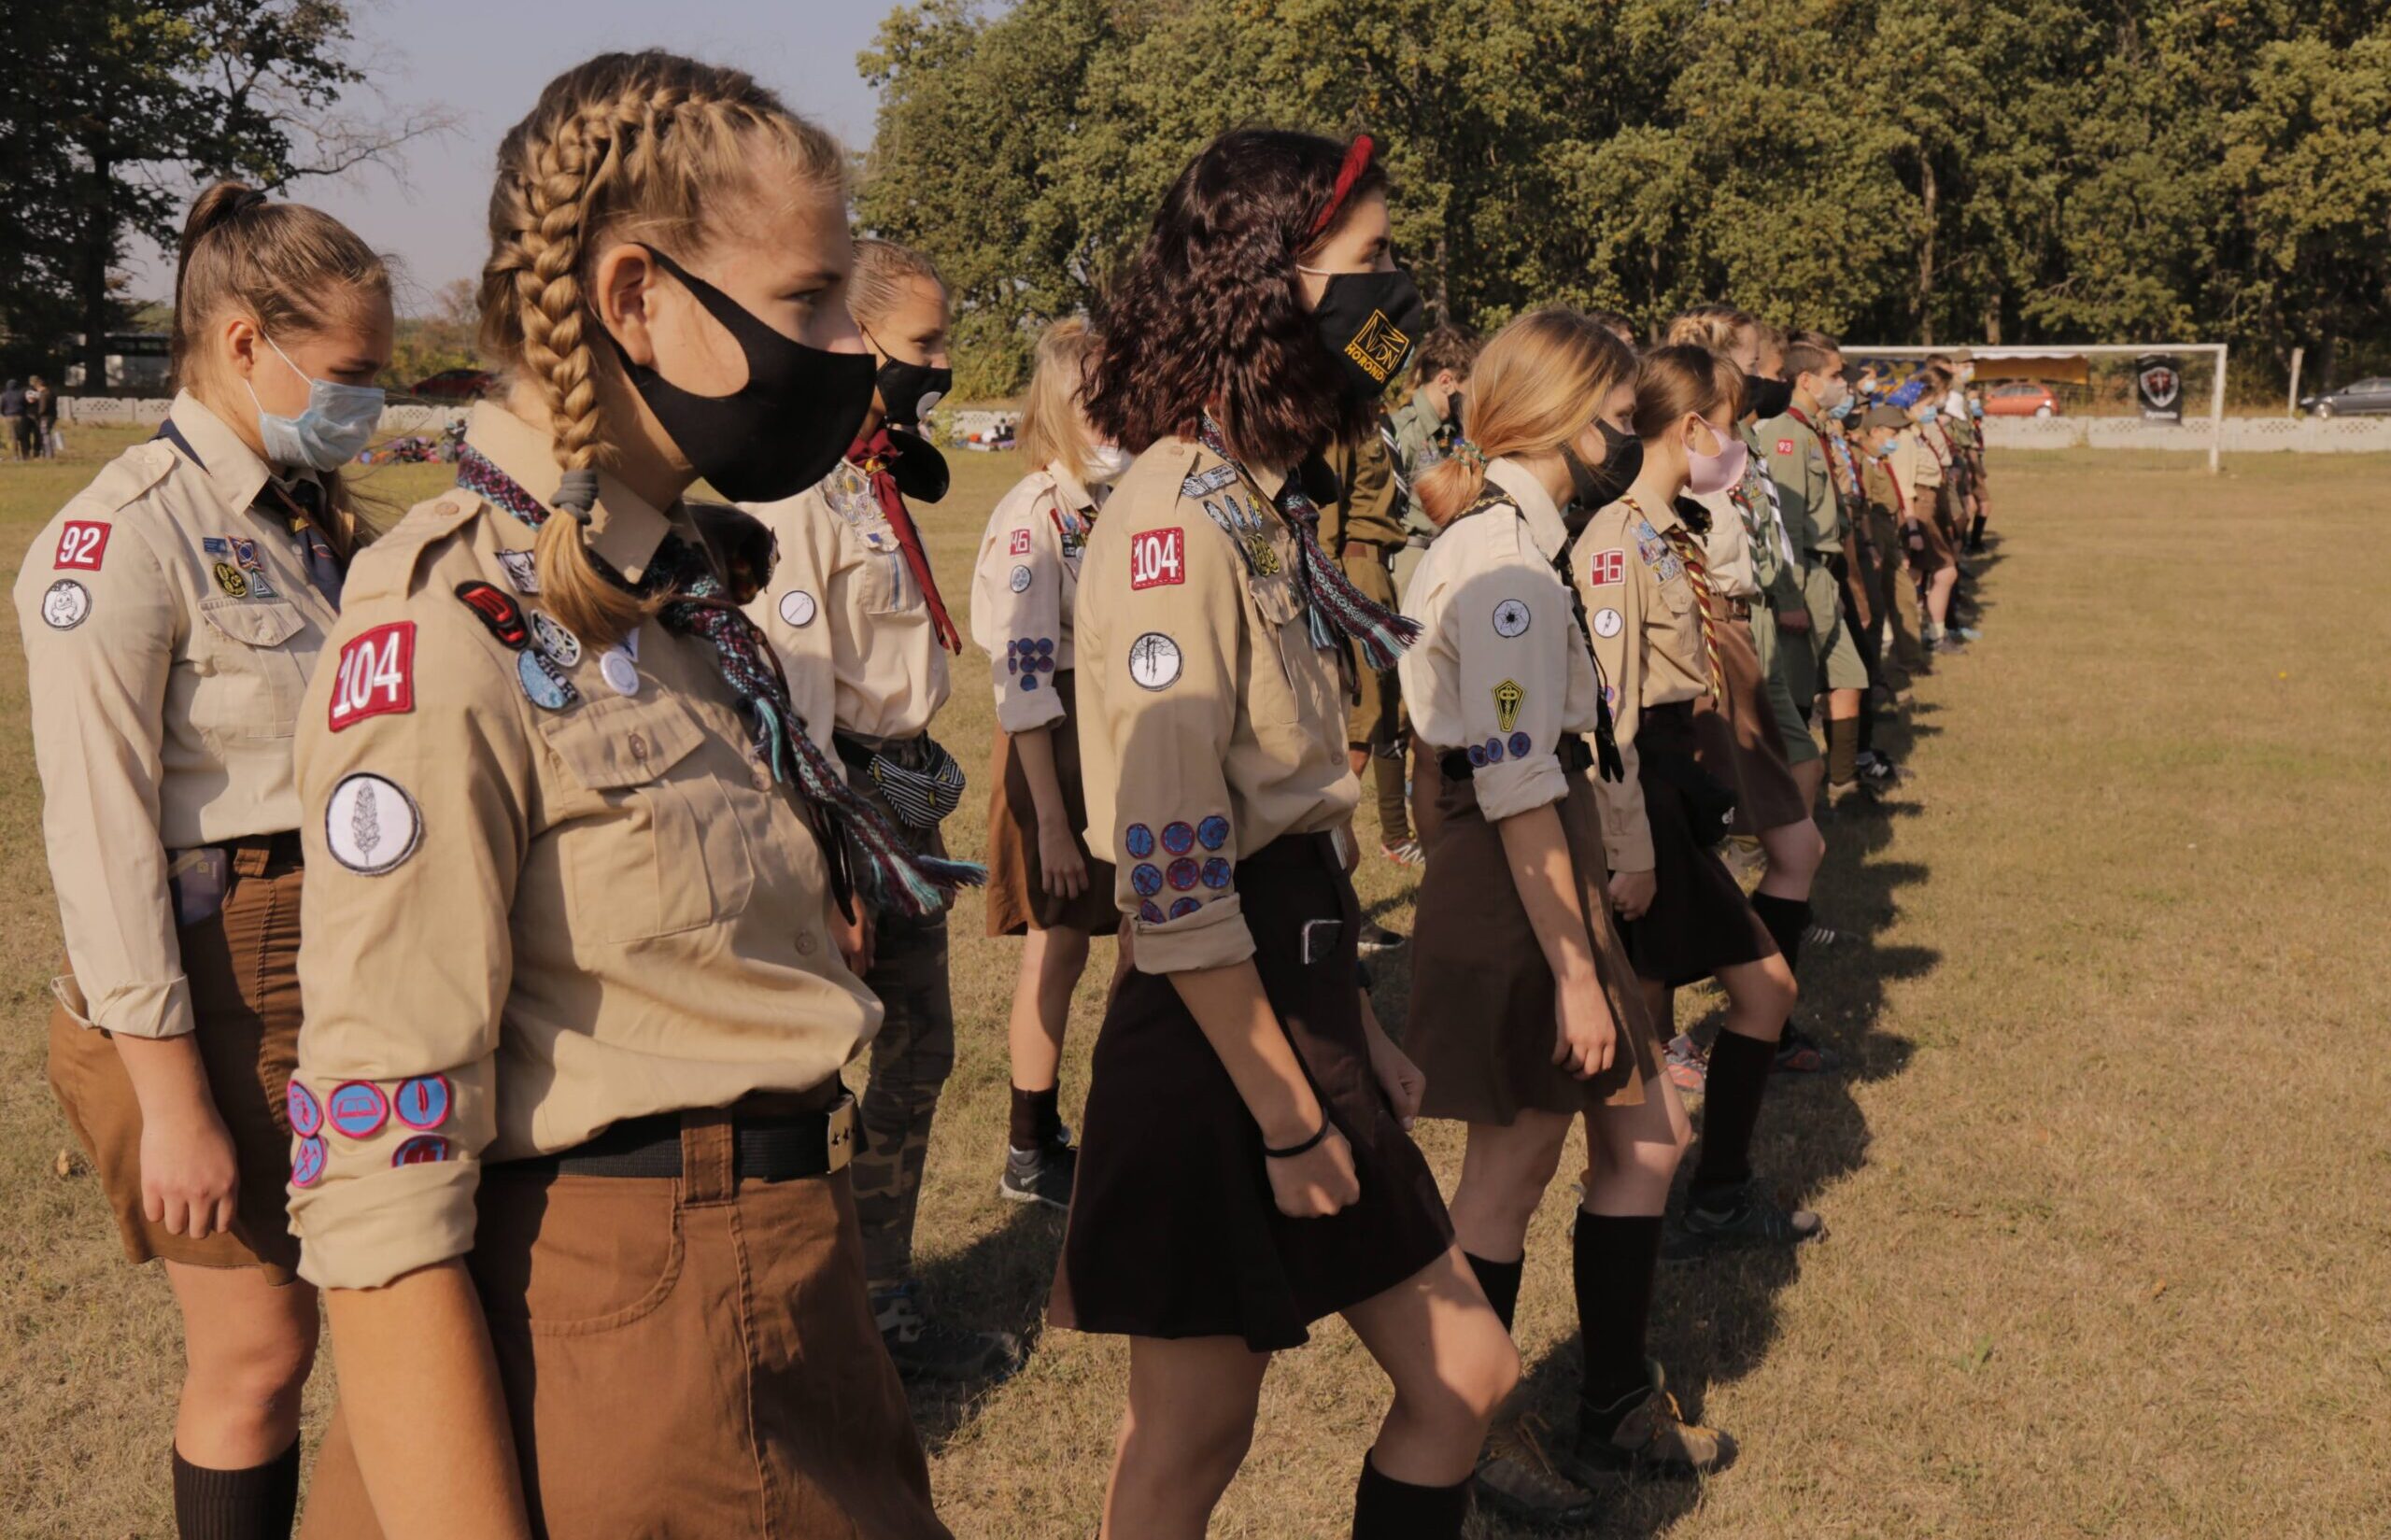 10 safety rules for scouting group trips during the pandemic